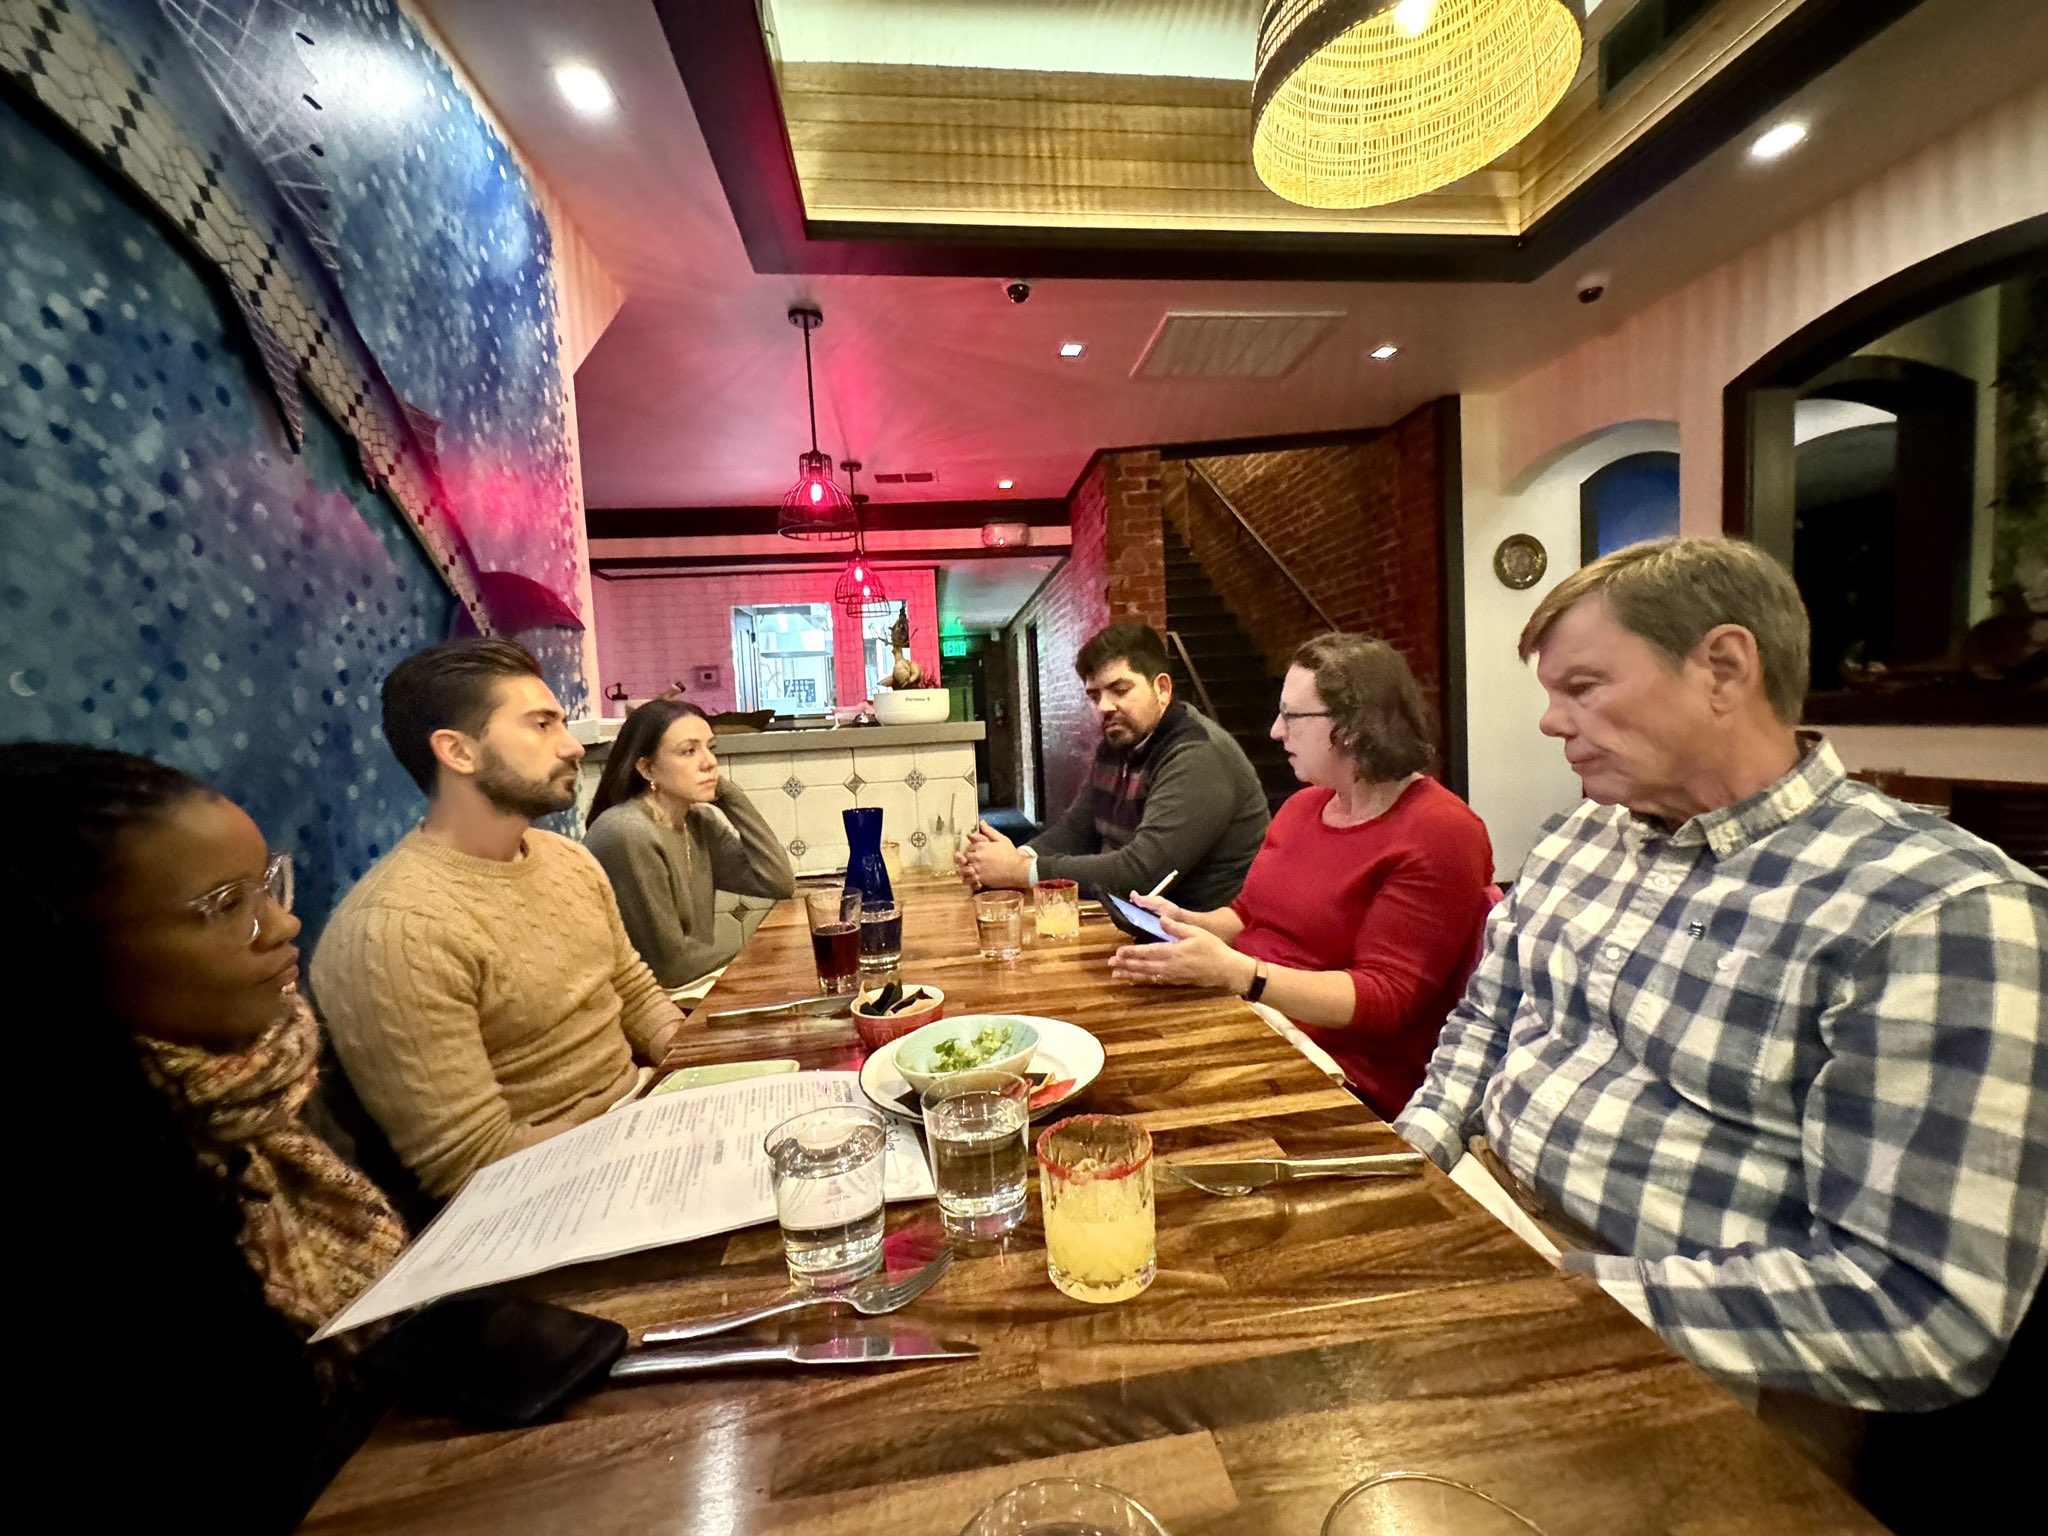 Six people are seated at a restaurant table in conversation.